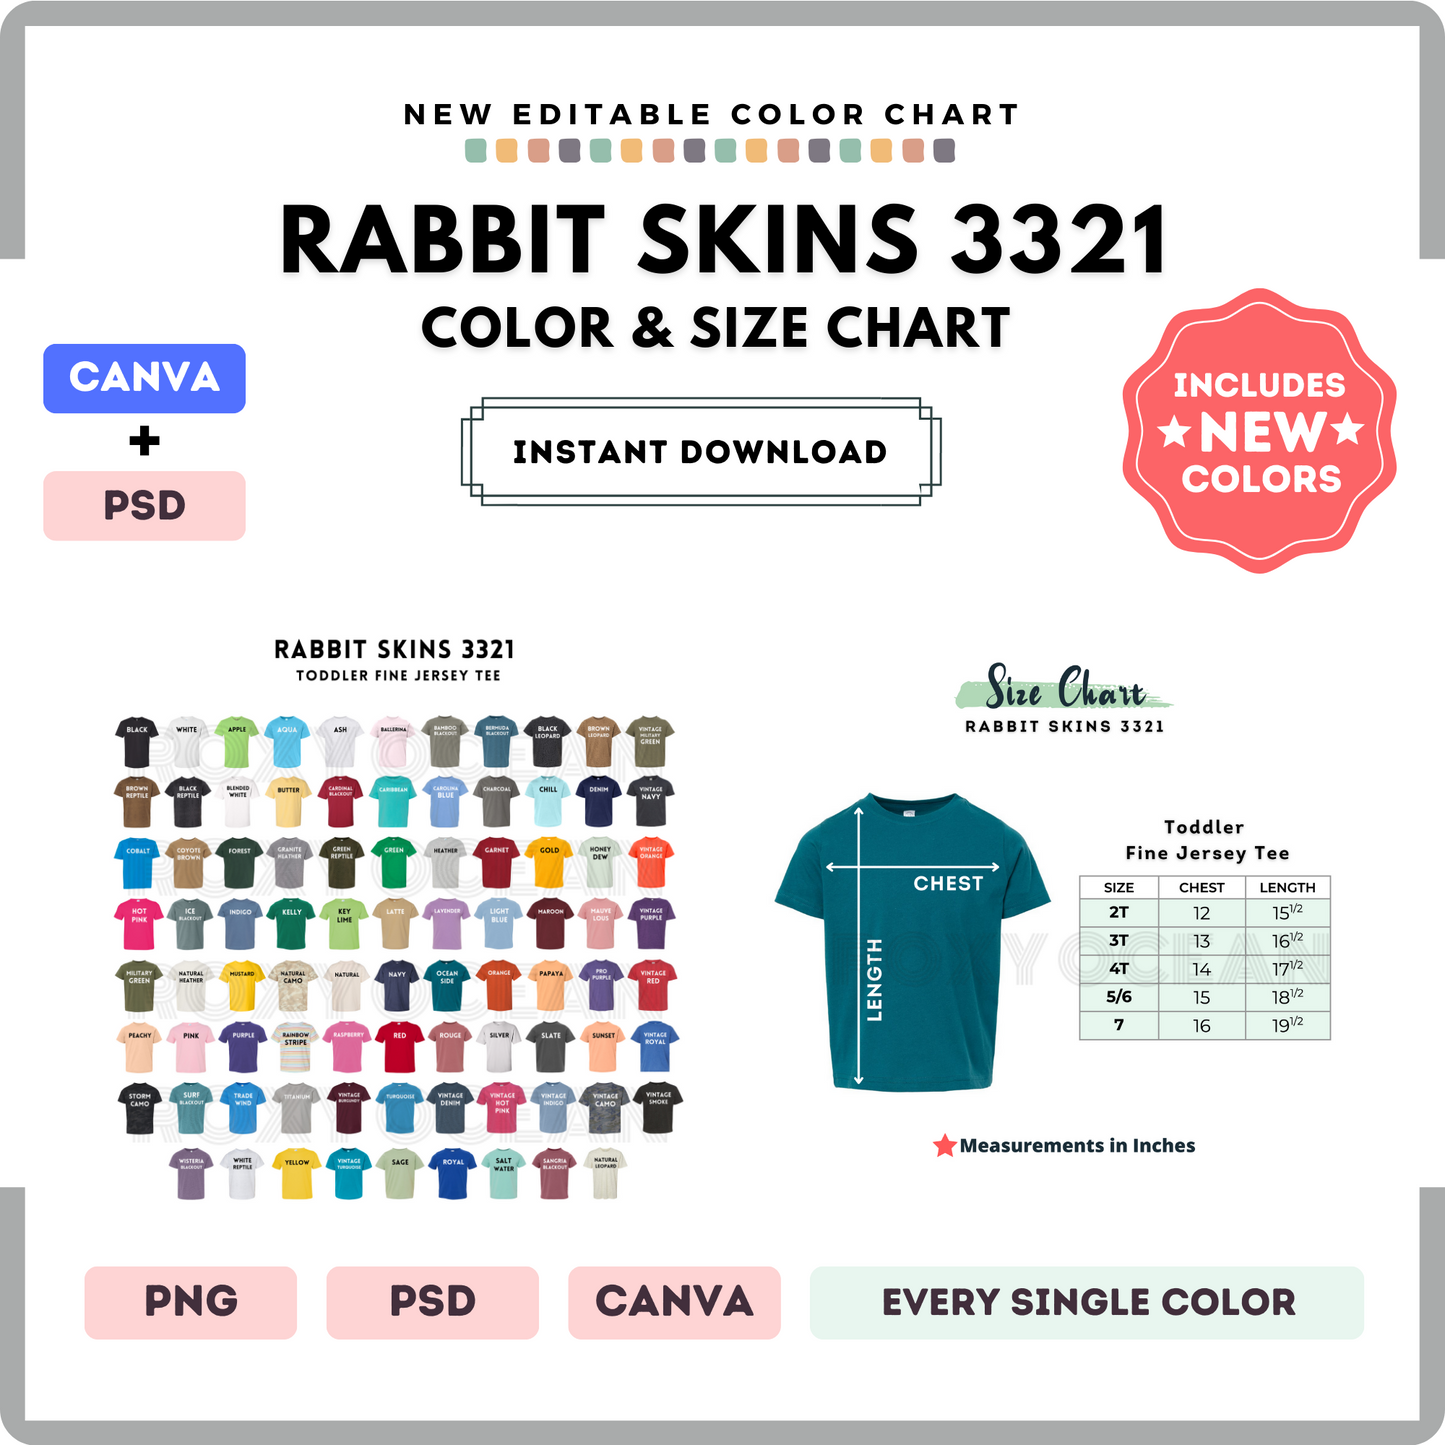 Rabbit Skins 3321 Color and Size Chart